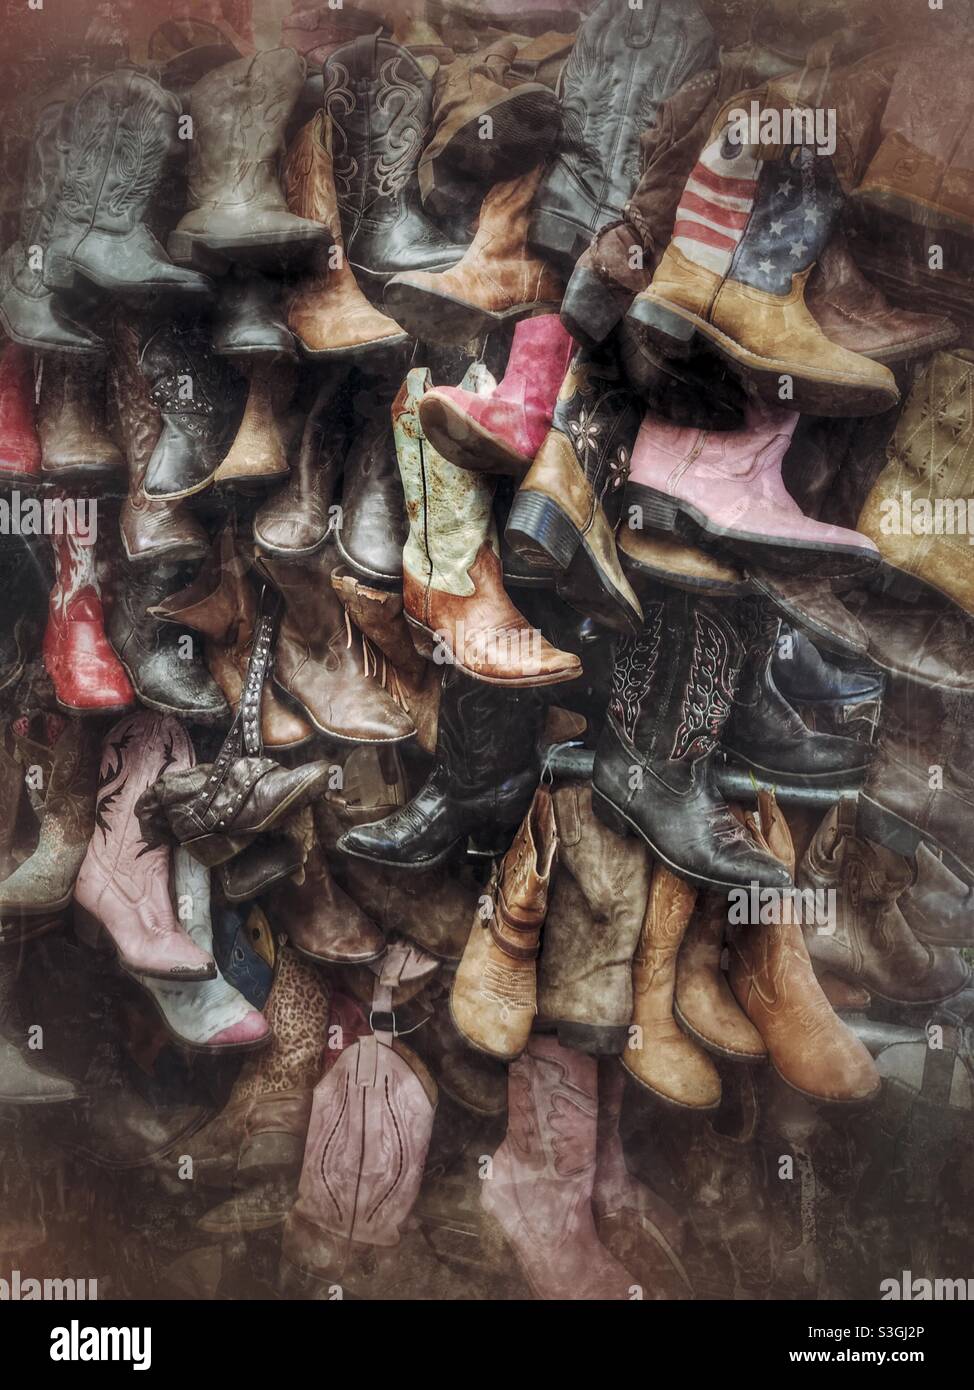 Wall of used cowboy boots for sale at vender’s booth Stock Photo